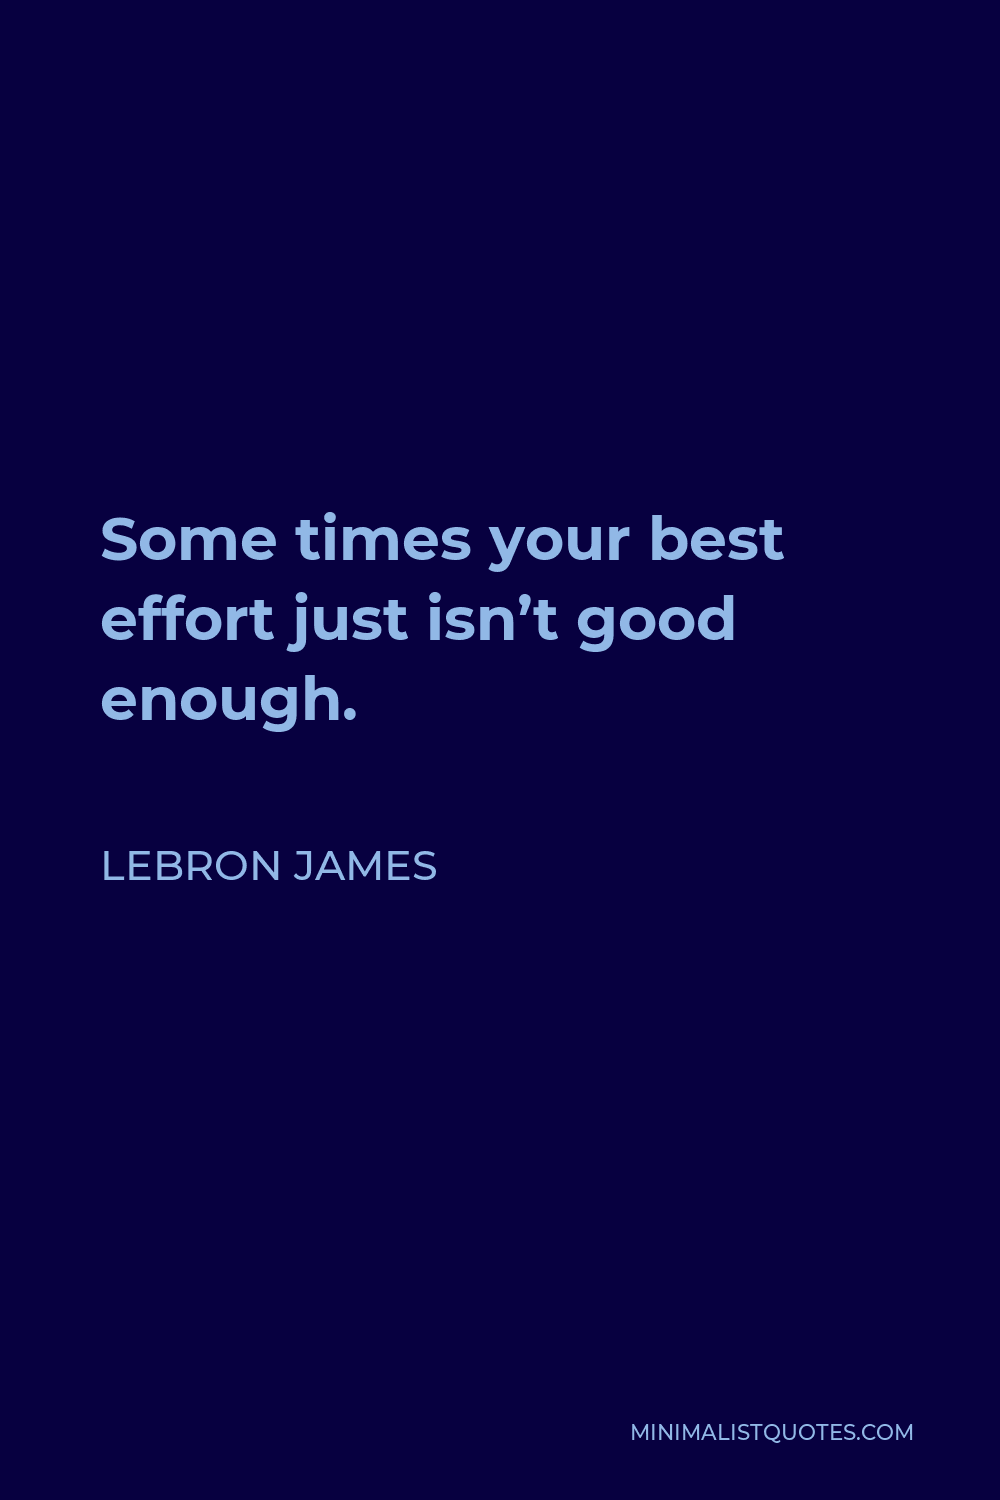 LeBron James Quote - Some times your best effort just isn’t good enough.